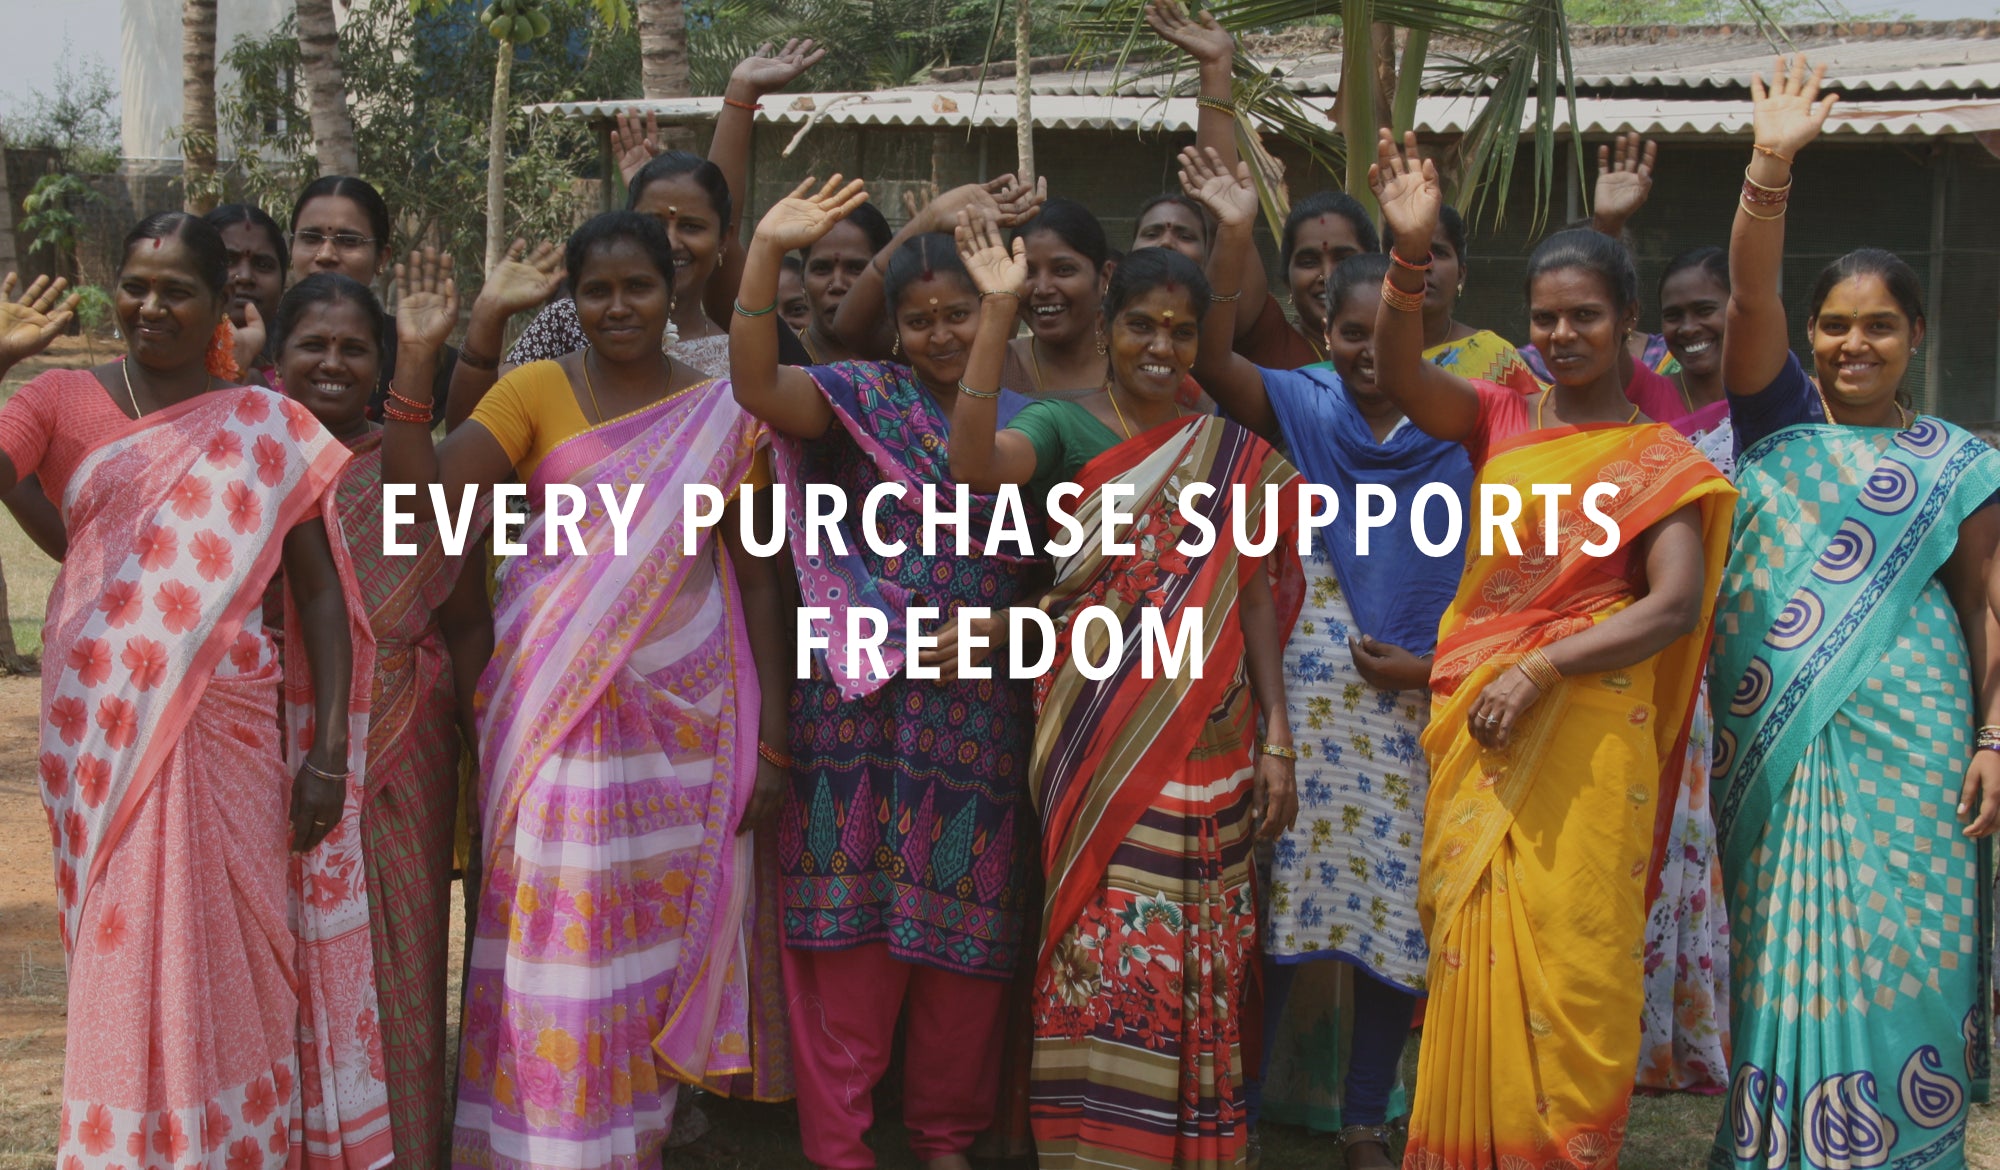 Group of joyful women artisans outside of ethical factory supporting fair trade. 